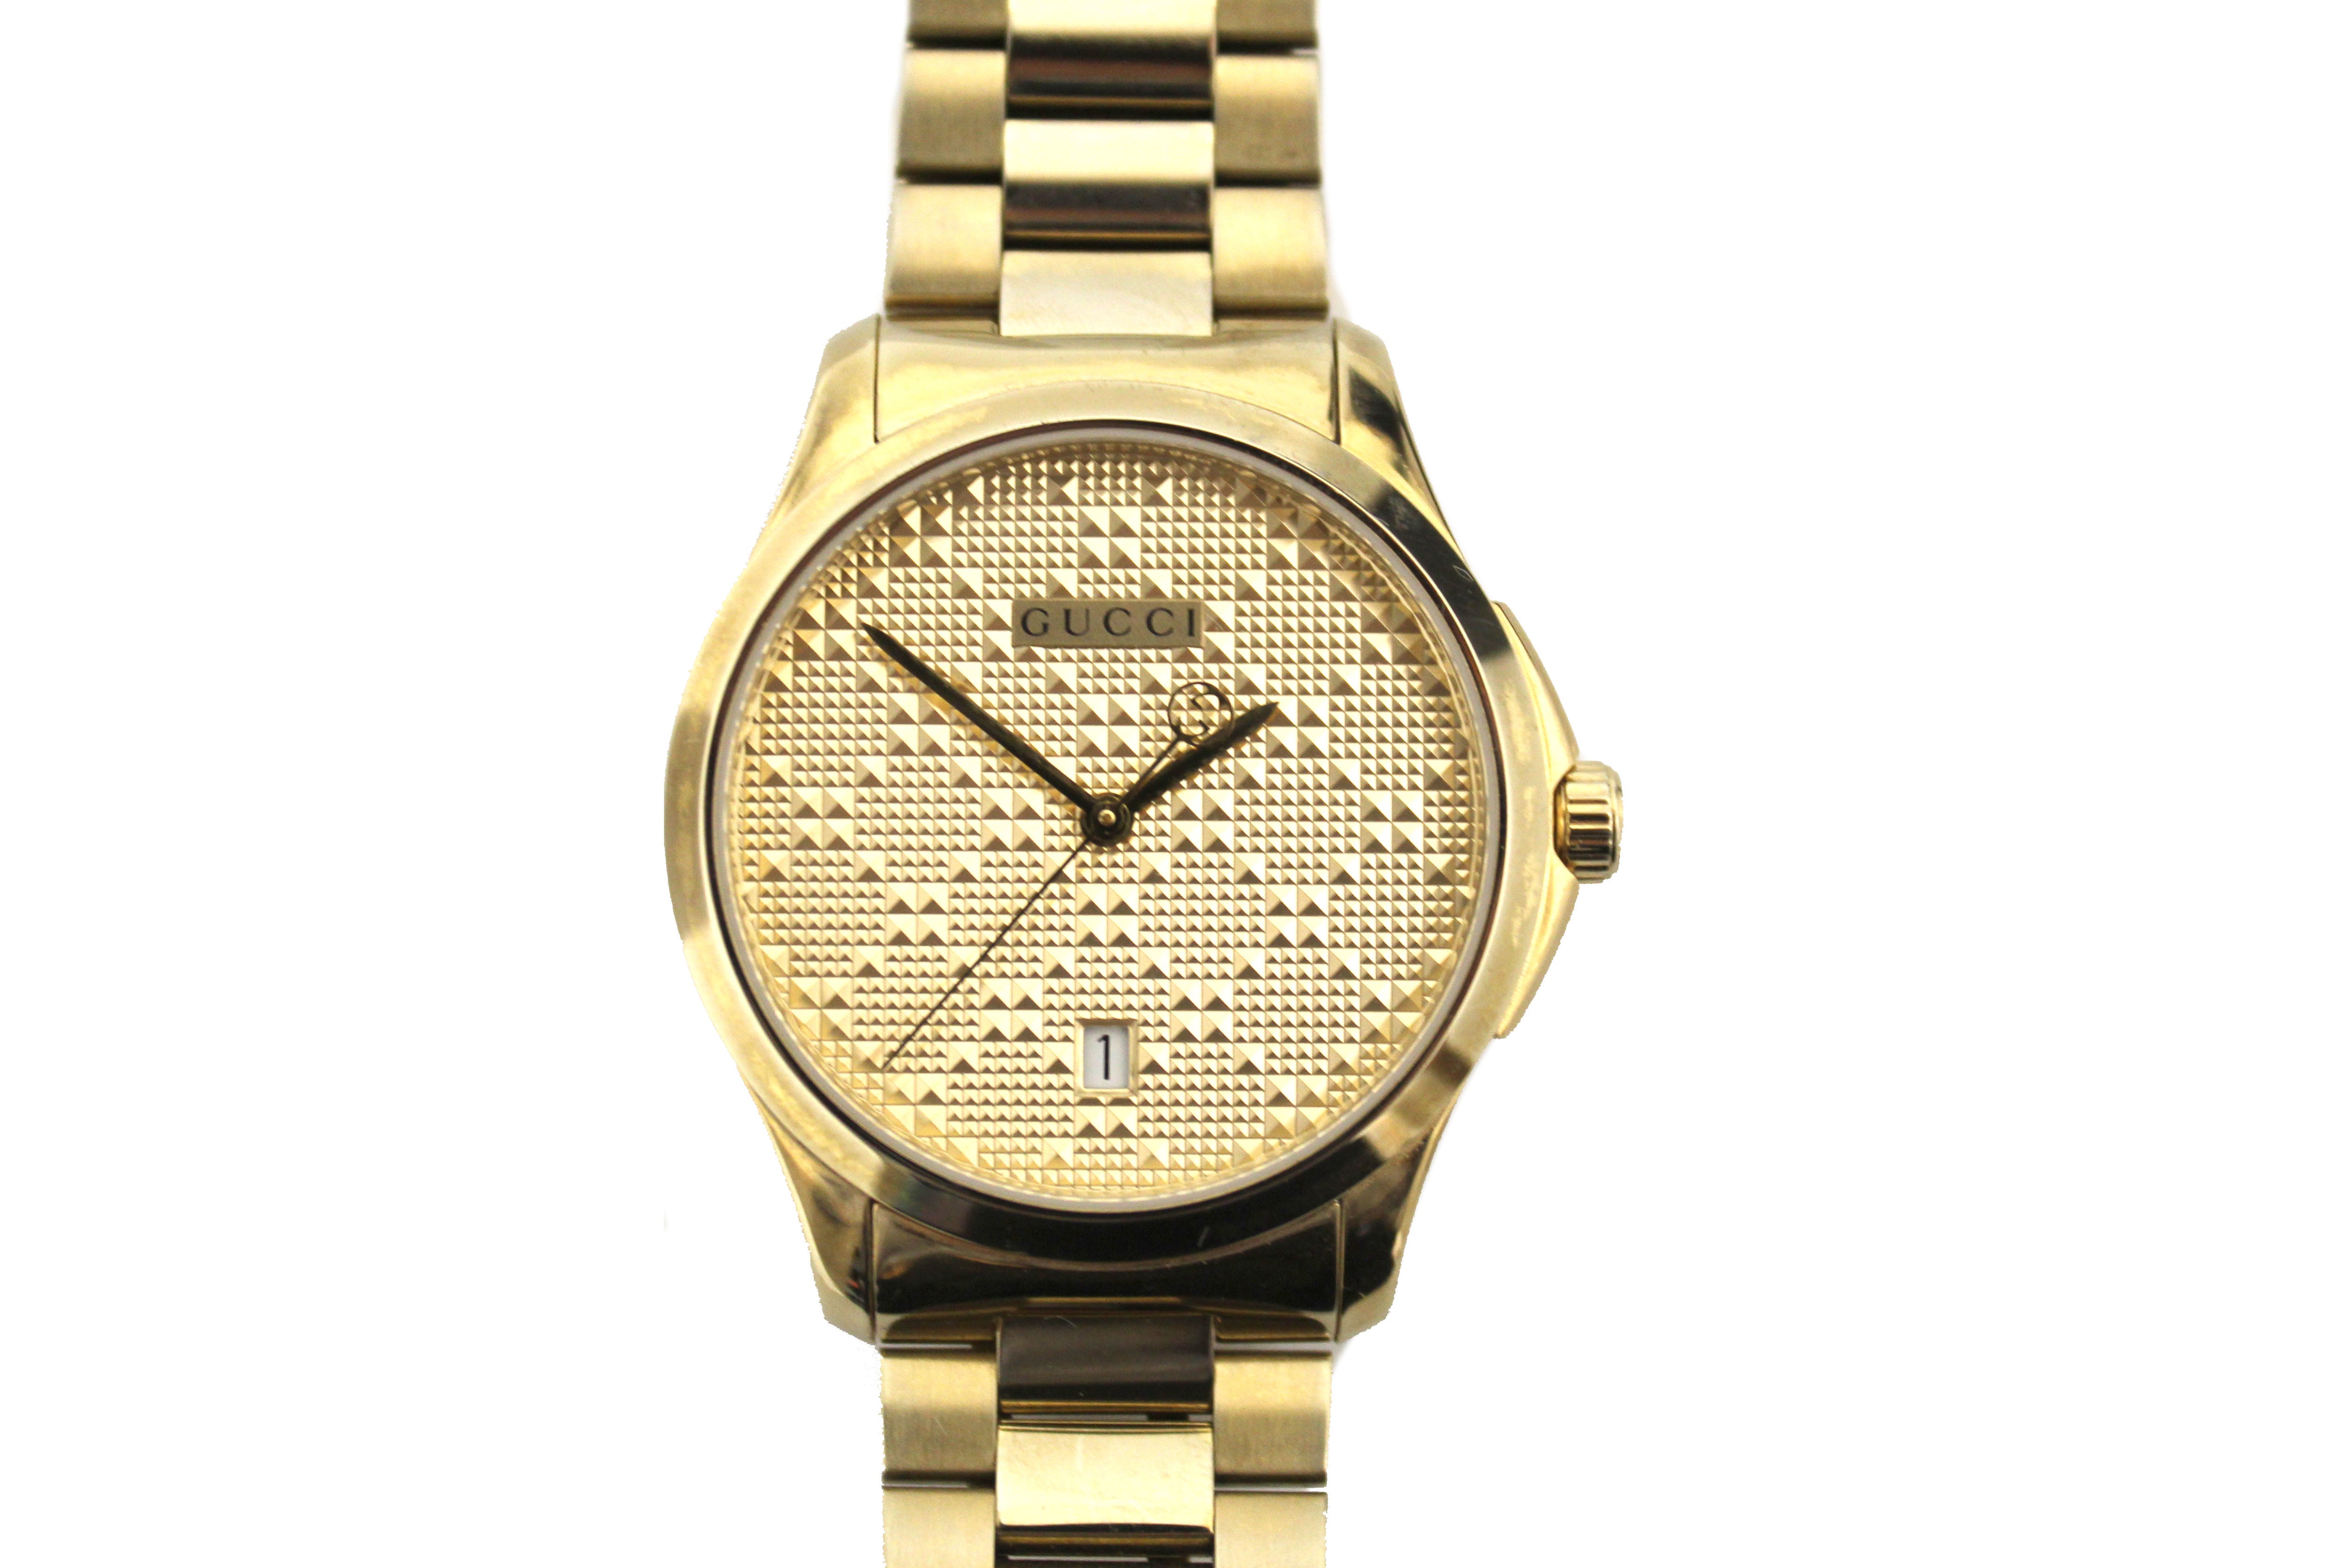 Authentic Gucci Swiss Quartz and Alloy Dress Gold-Toned Watch